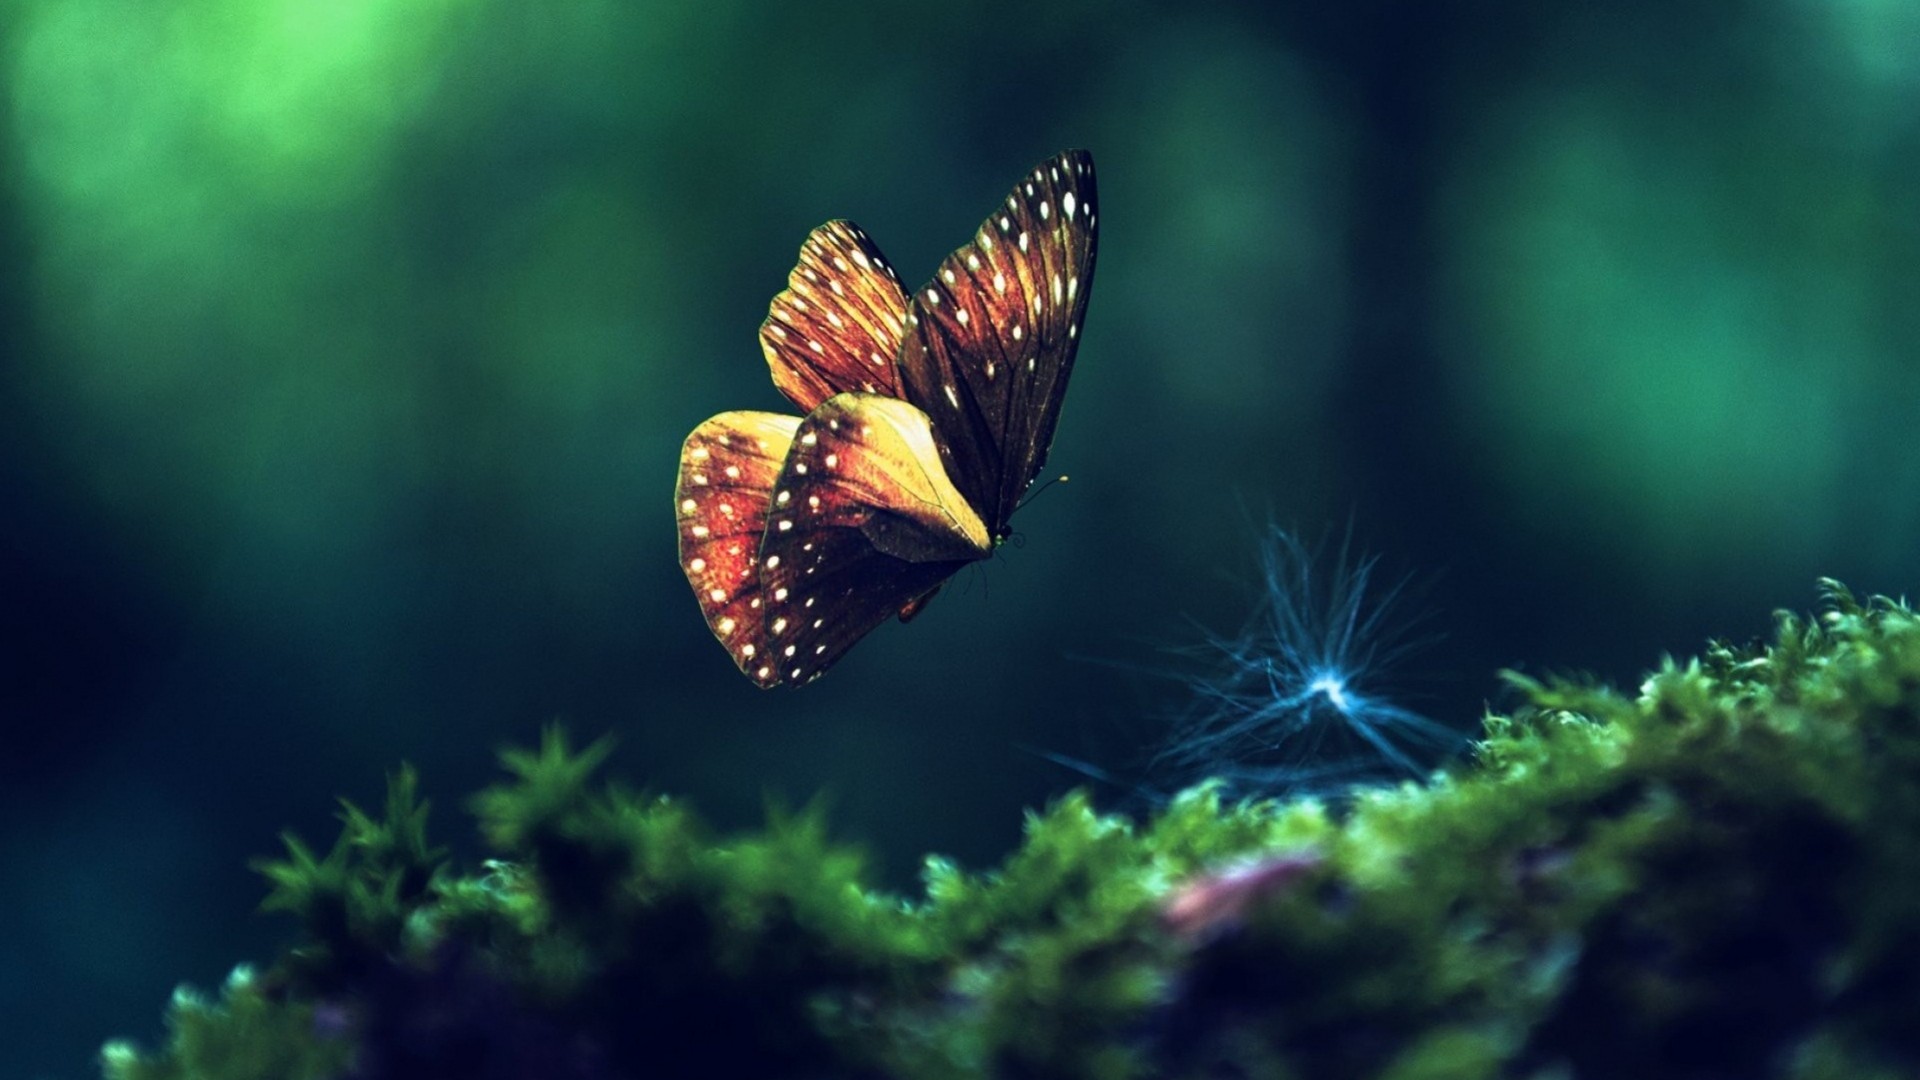 General 1920x1080 nature butterfly insect macro moss animals green background